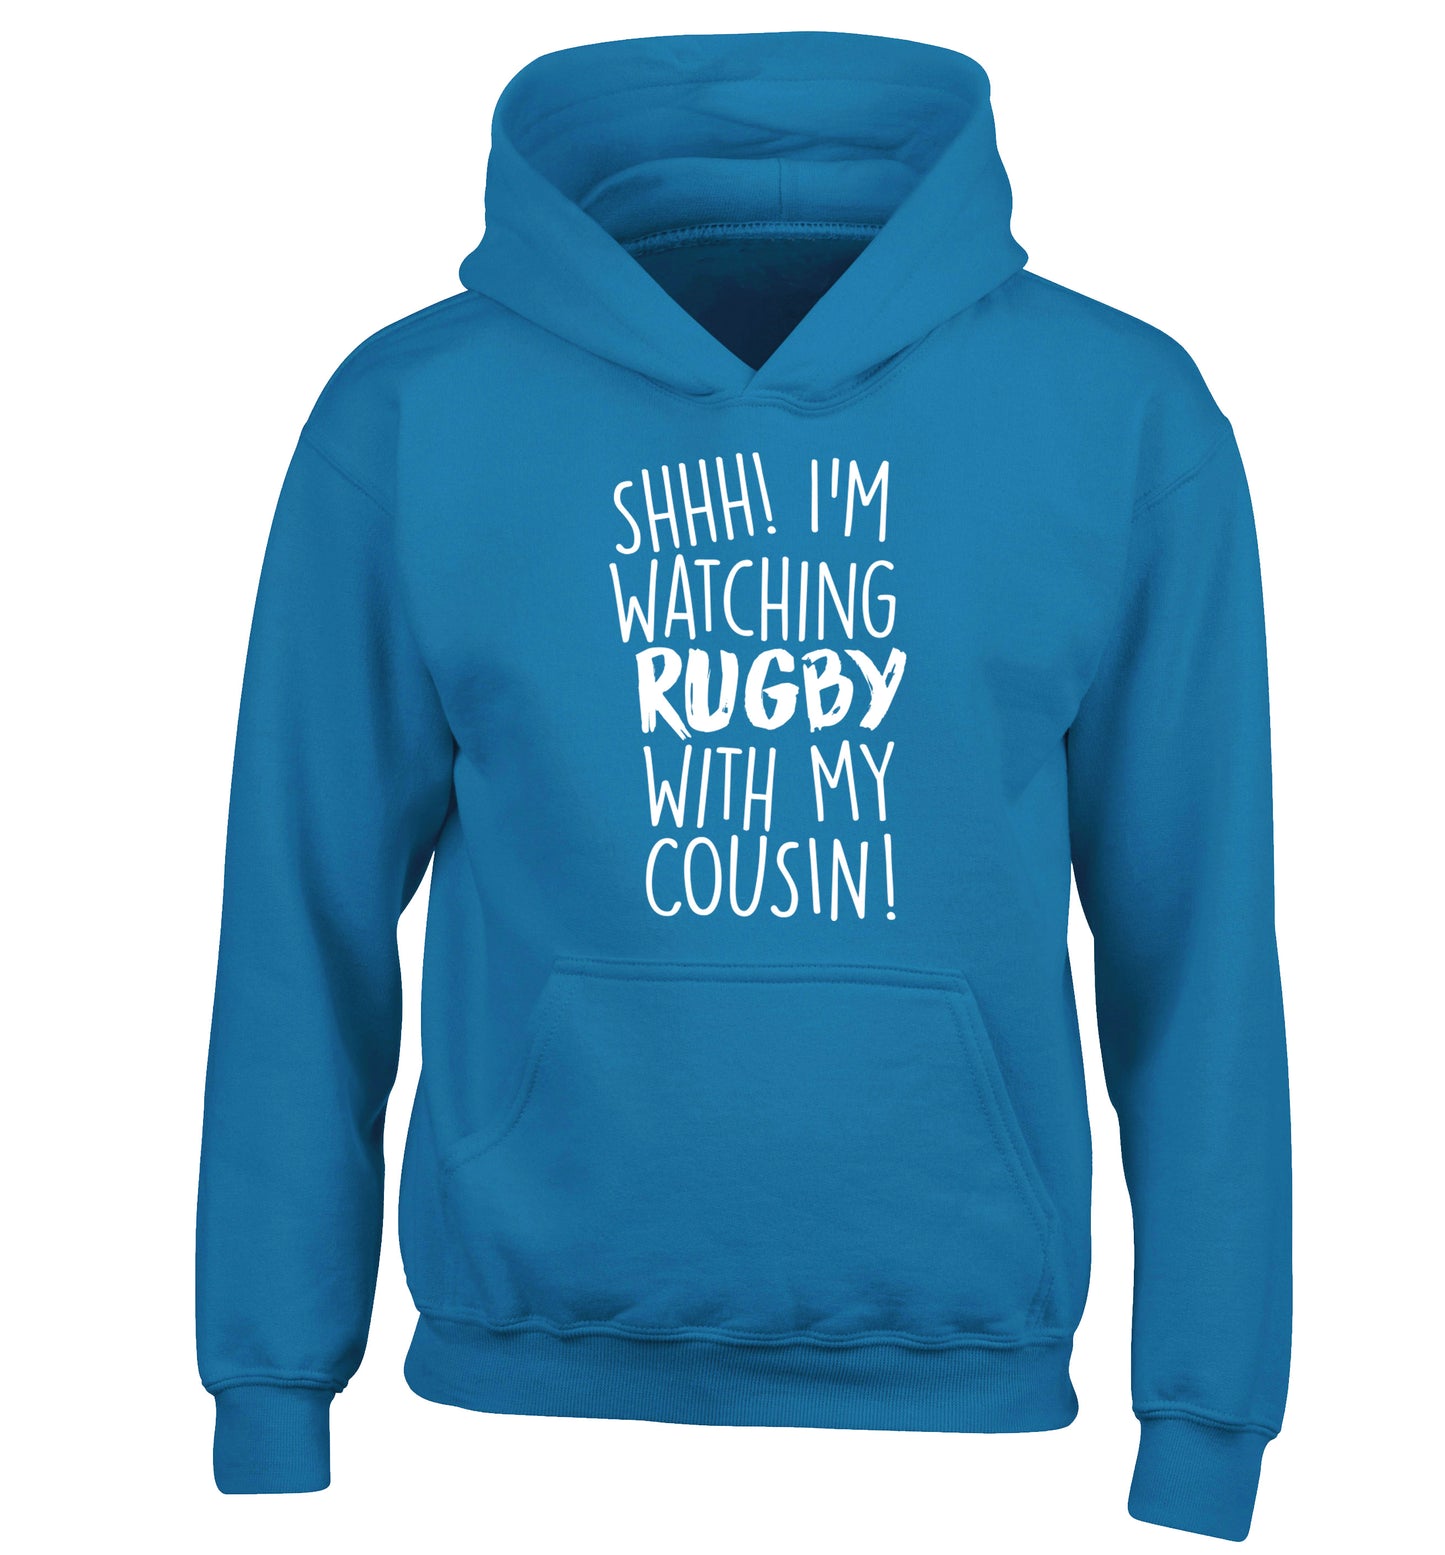 Shhh I'm watching rugby with my cousin children's blue hoodie 12-13 Years